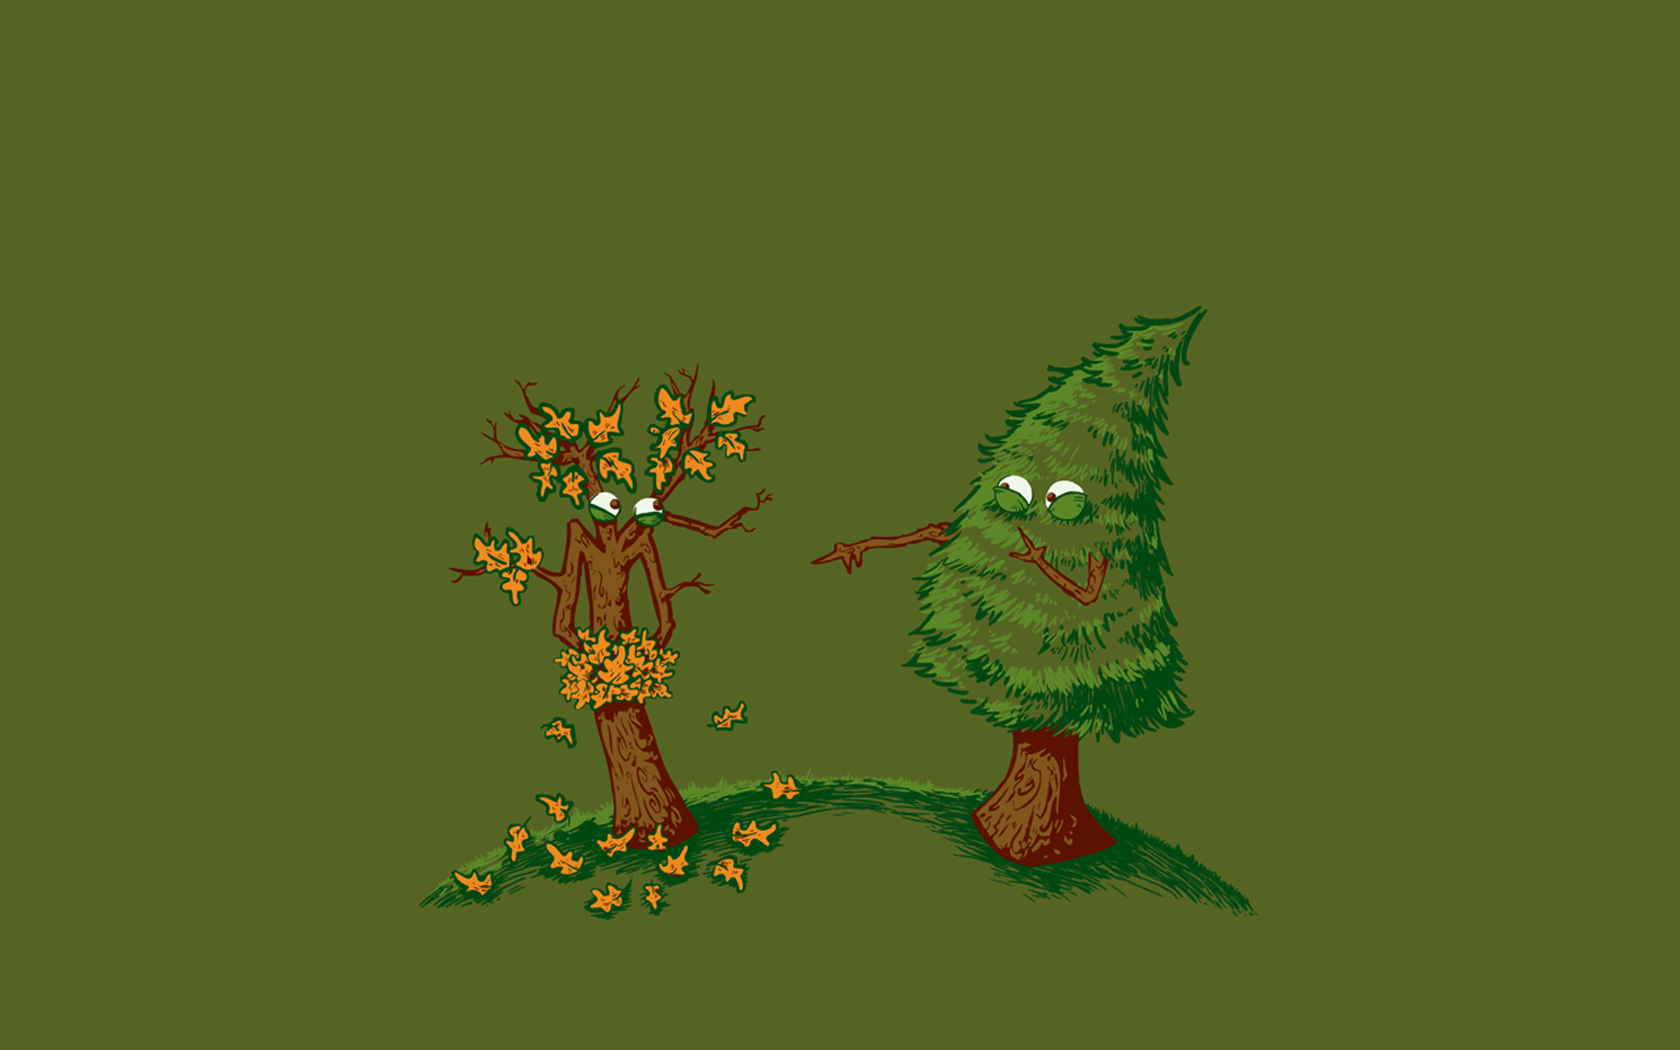 Comedy trees wallpaper - - High Quality and Resolution